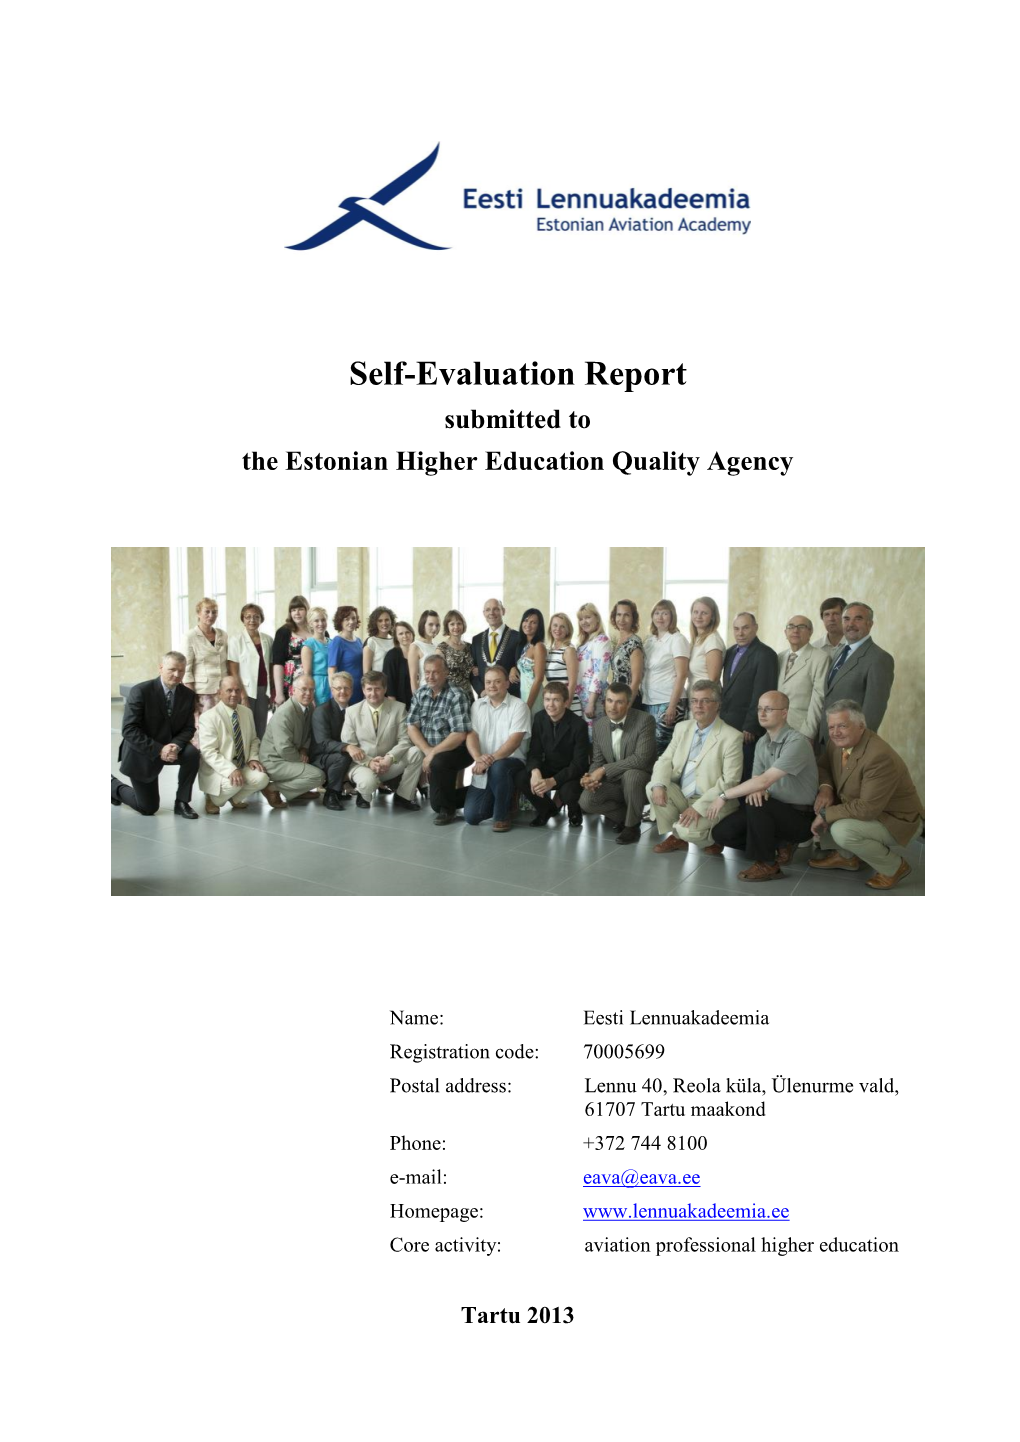 Self-Evaluation Report Submitted to the Estonian Higher Education Quality Agency